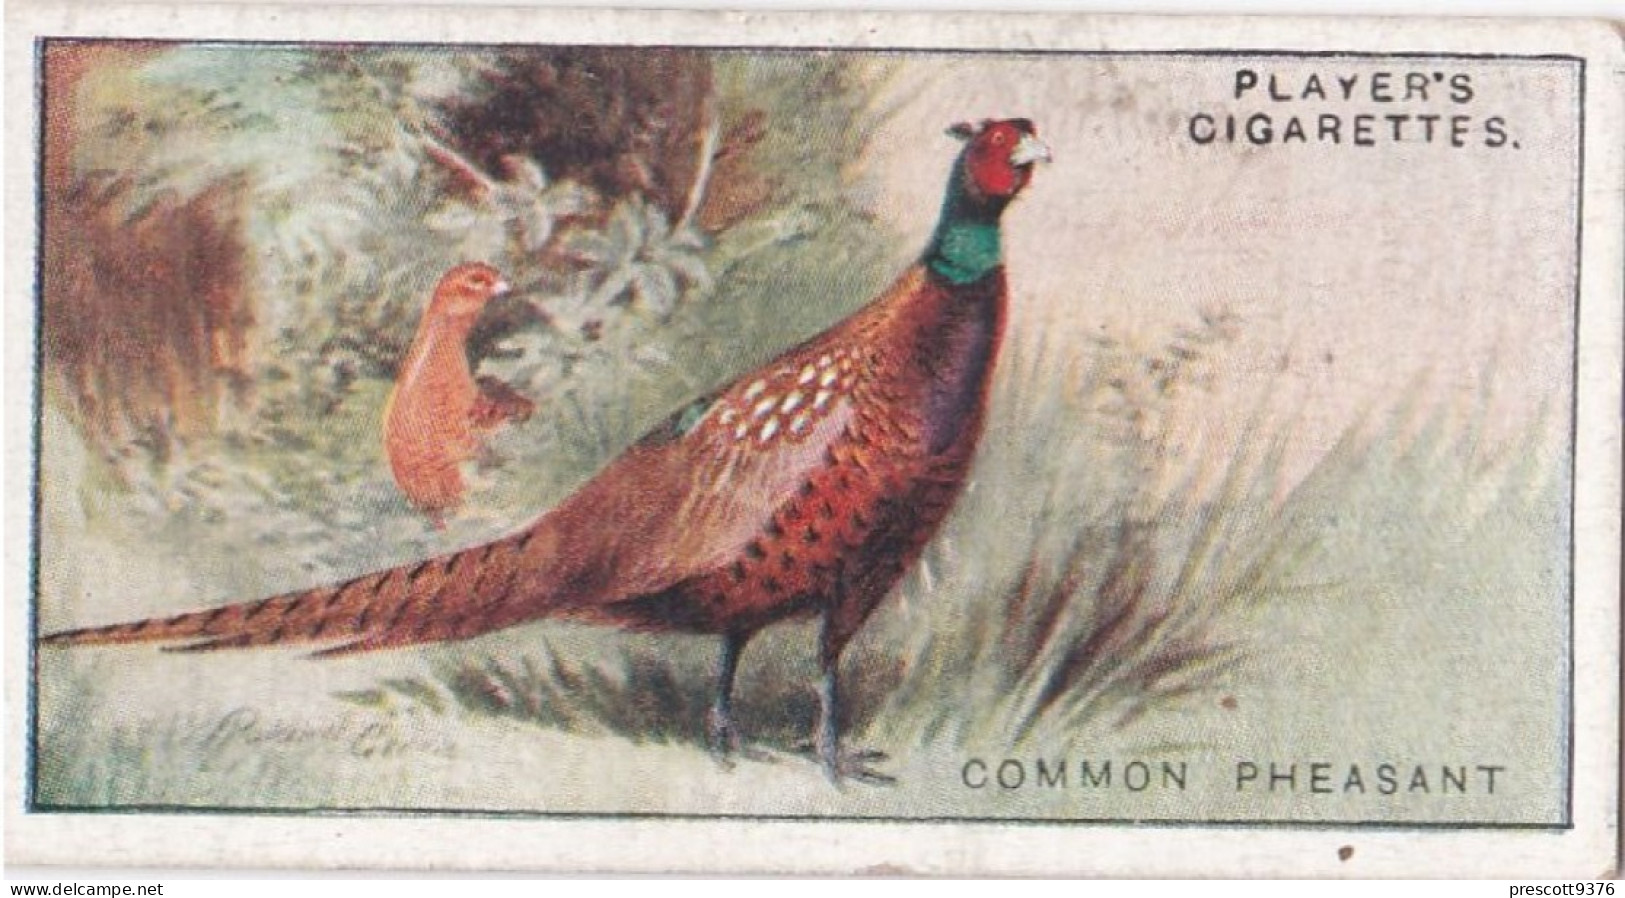 29 Common Pheasant  - Game Birds & Wildfowl 1927  - Players Cigarette Card - Original - Player's